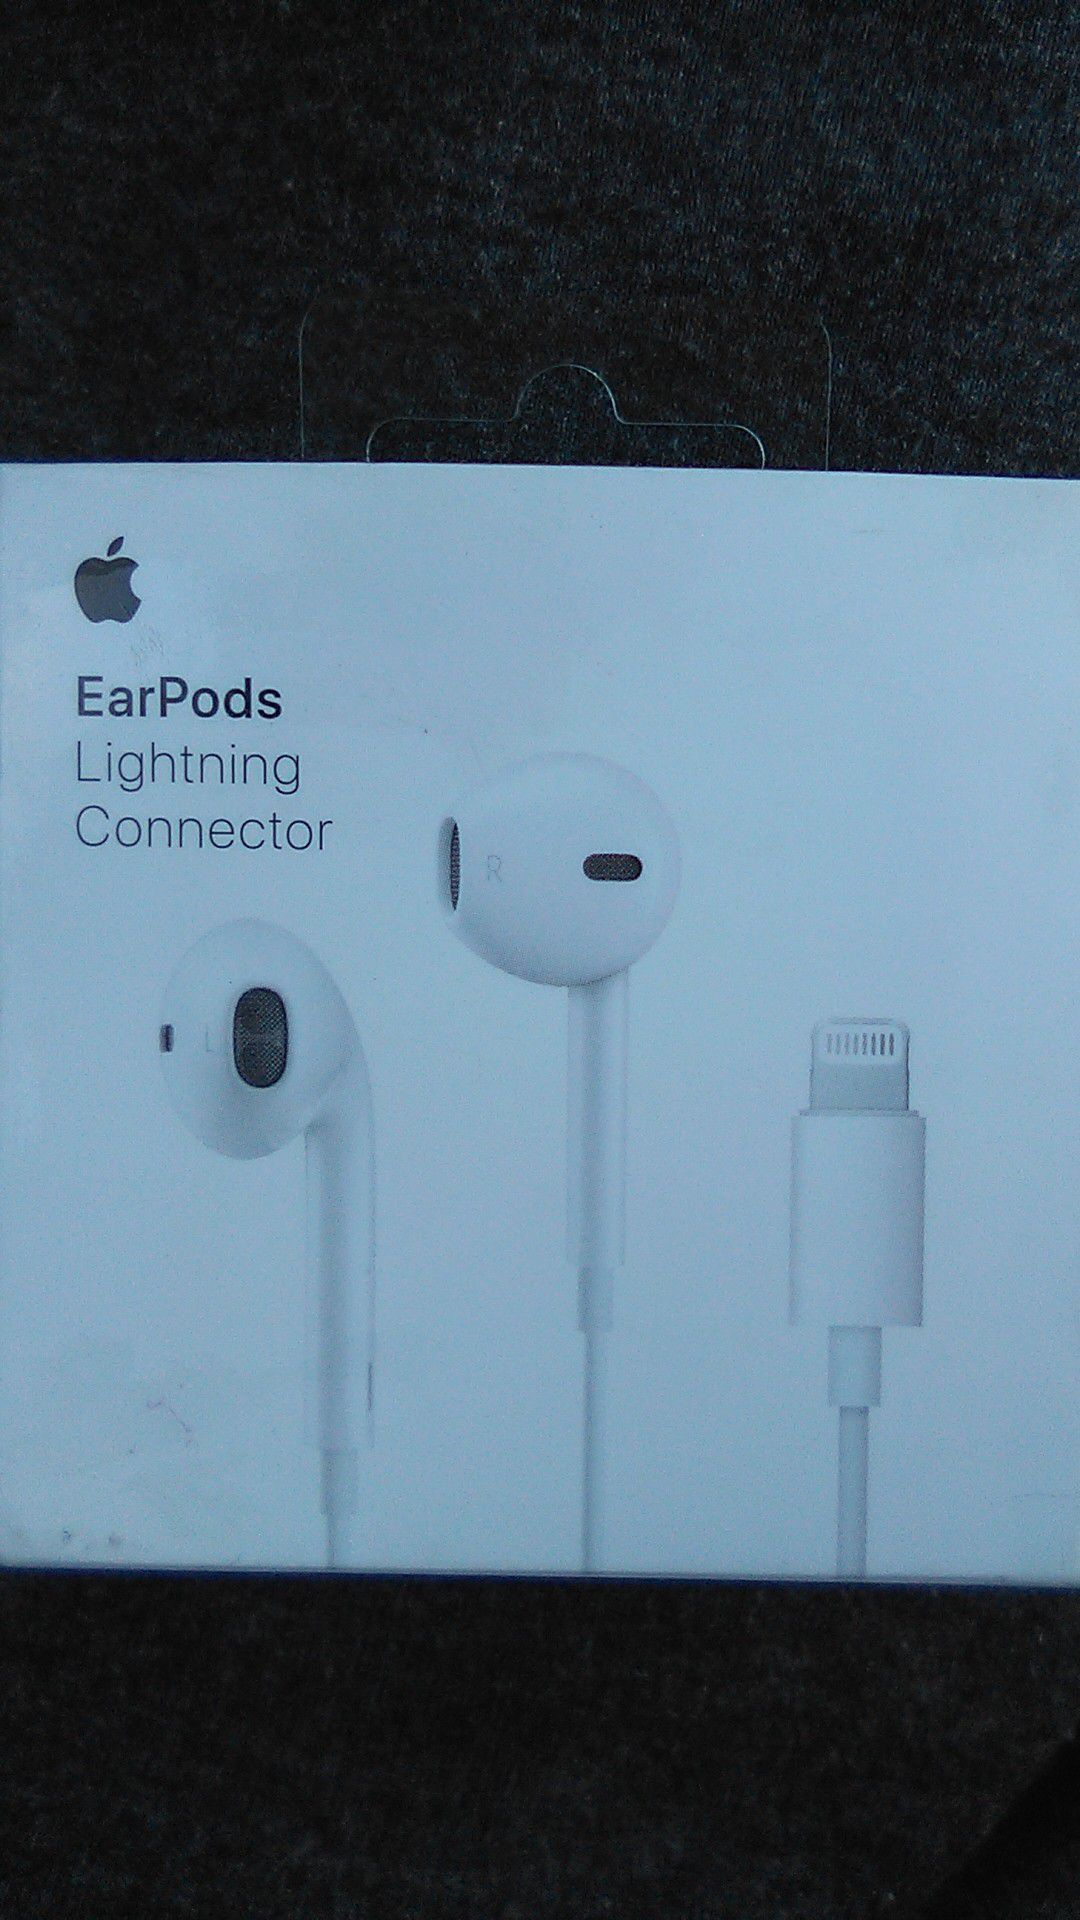 Apple earbuds. W lighting connector